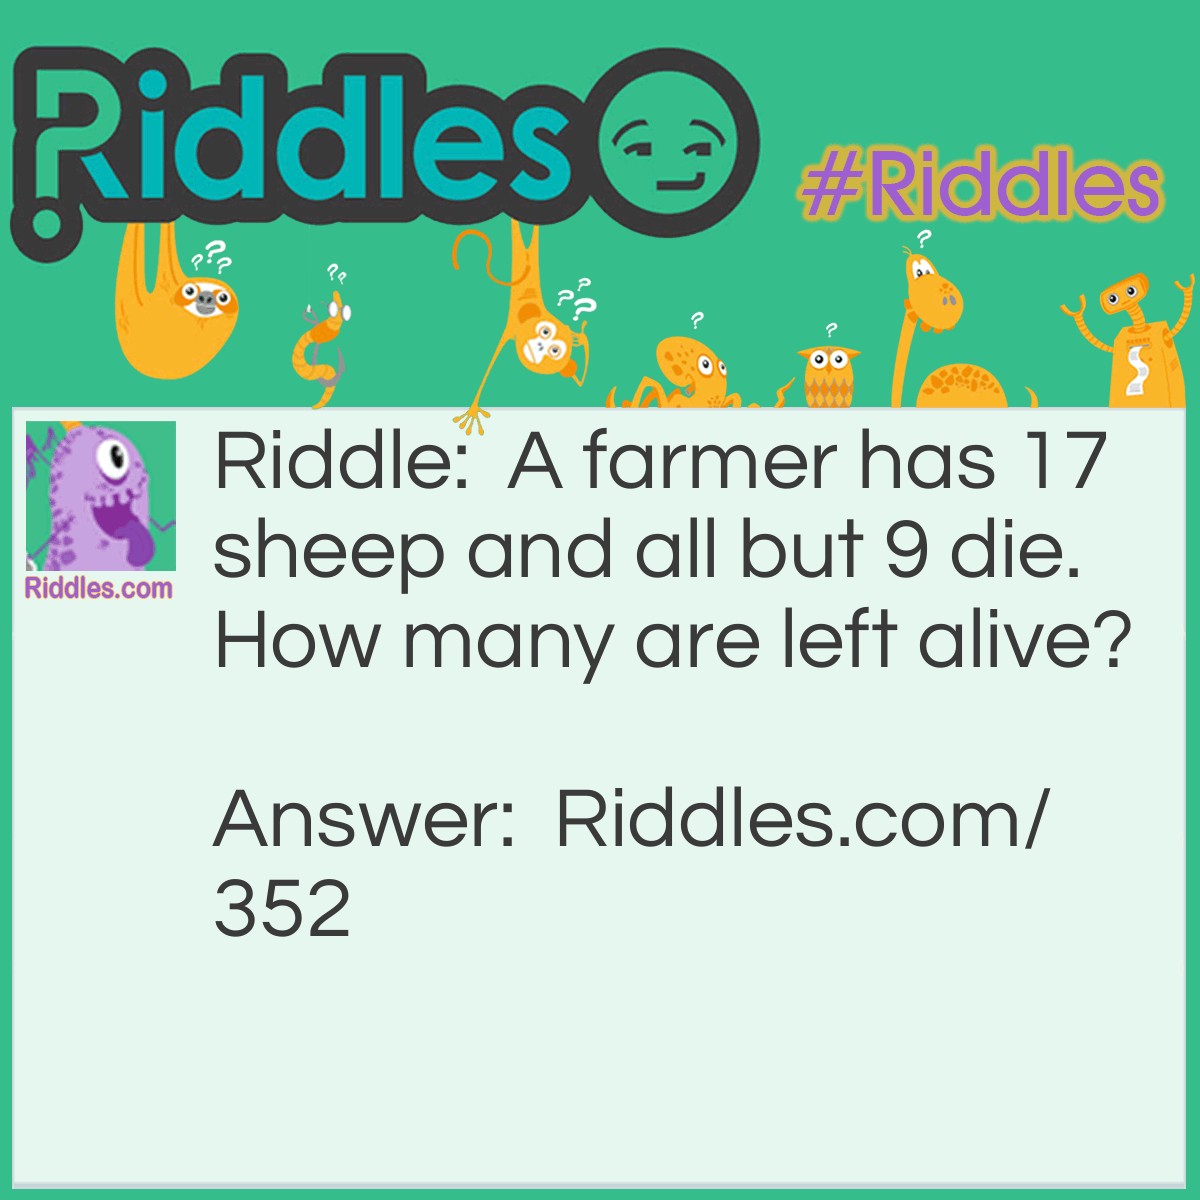 Riddle: A farmer has 17 sheep and all but 9 die. How many are left alive? Answer: 9. All but nine die.